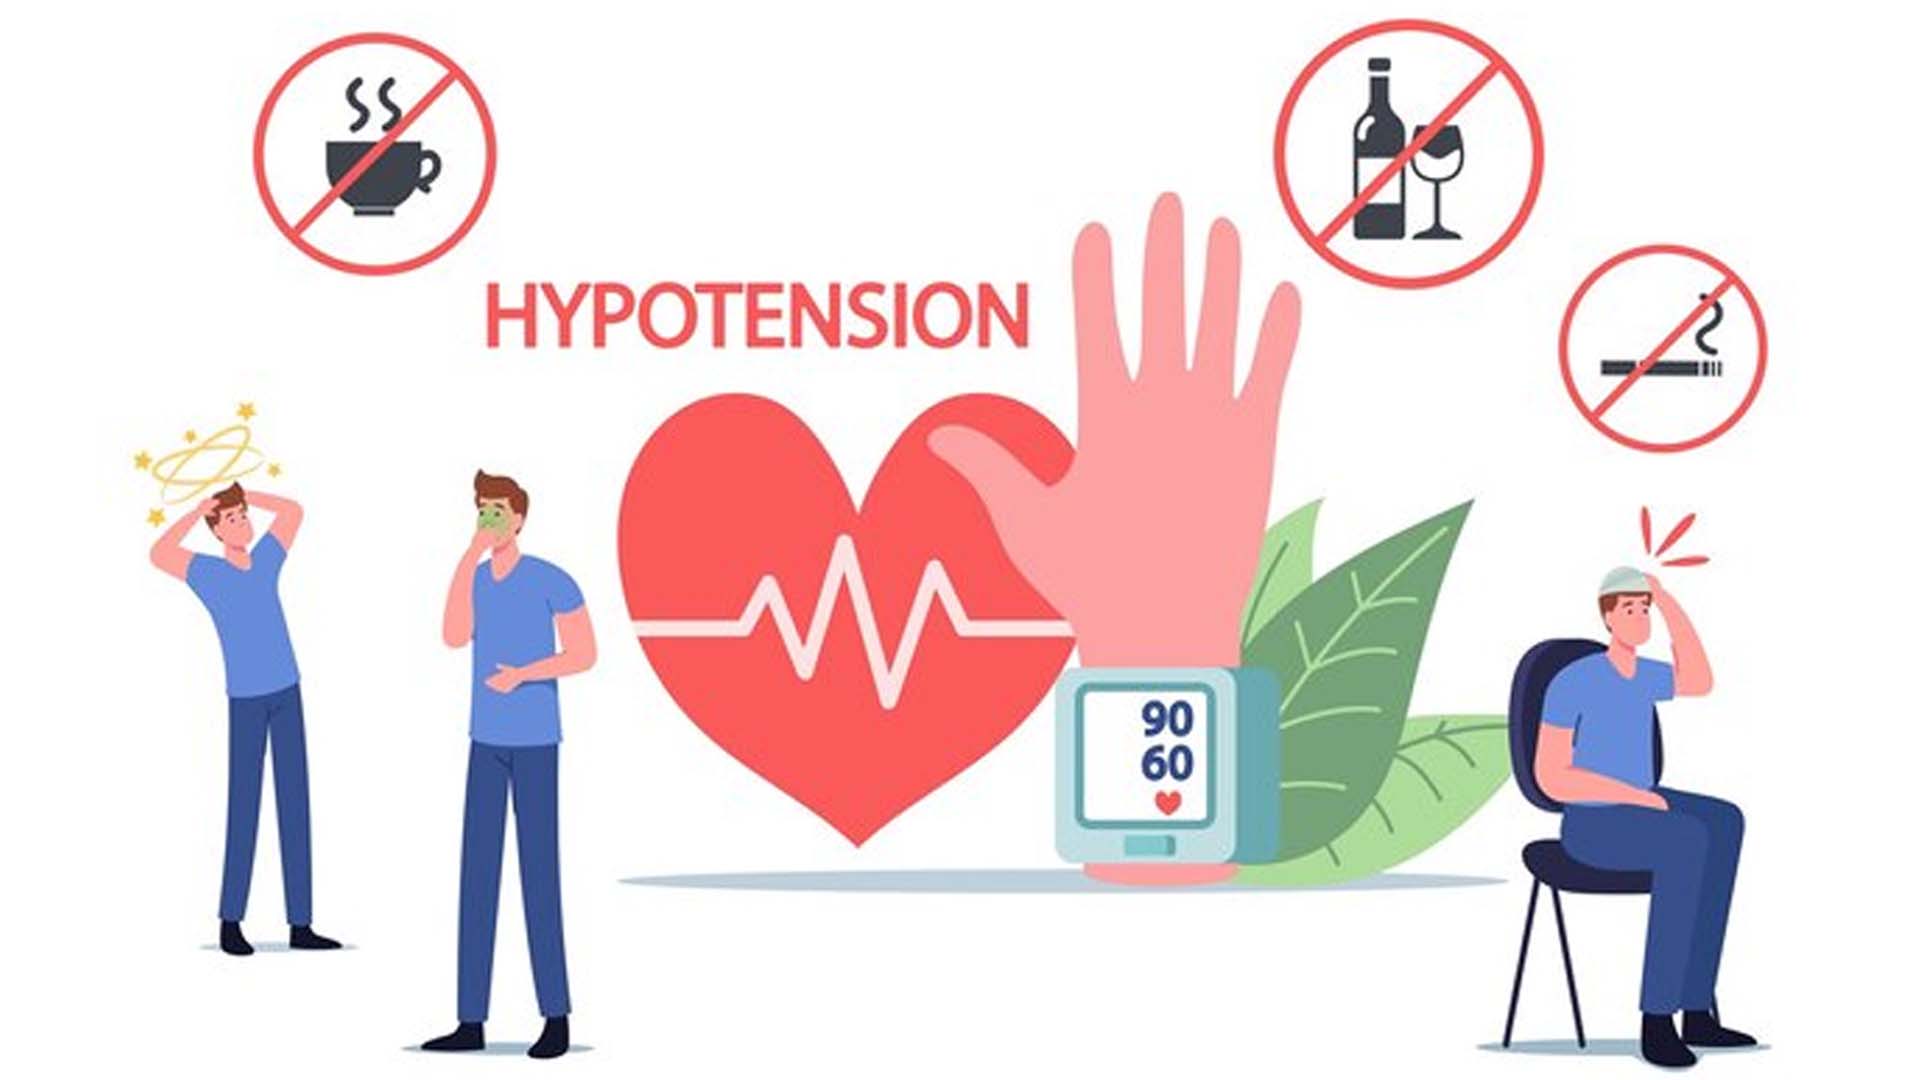 Low Blood Pressure (Hypotension): Symptoms, Causes and Treatment